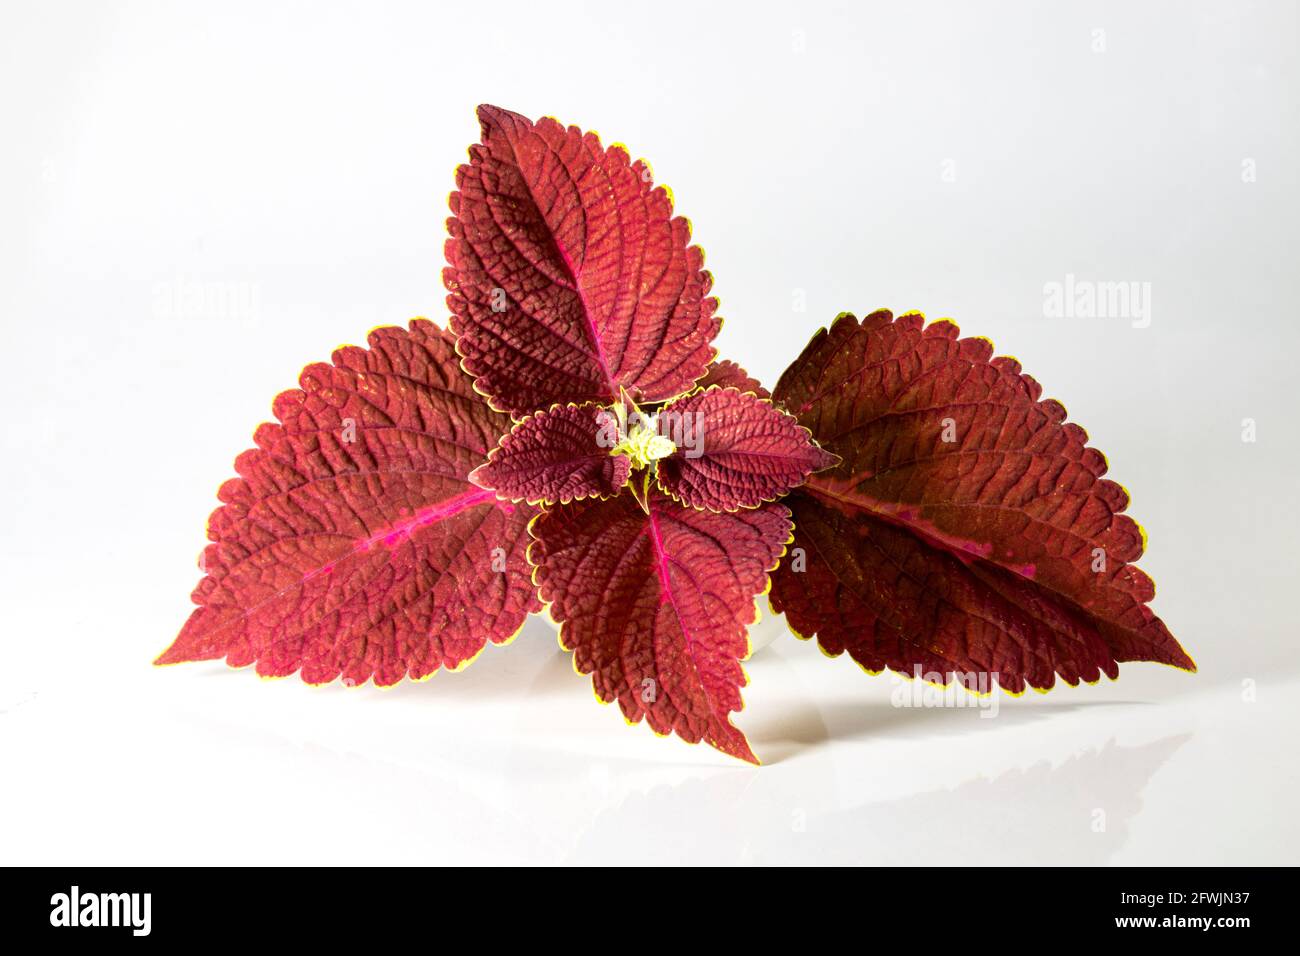 Coleus or Painted Nettles leaves in studio. Plectranthus scutellarioides, or Miana leaves or Coleus Scutellarioides, Coleus Blumei is herbs, species o Stock Photo